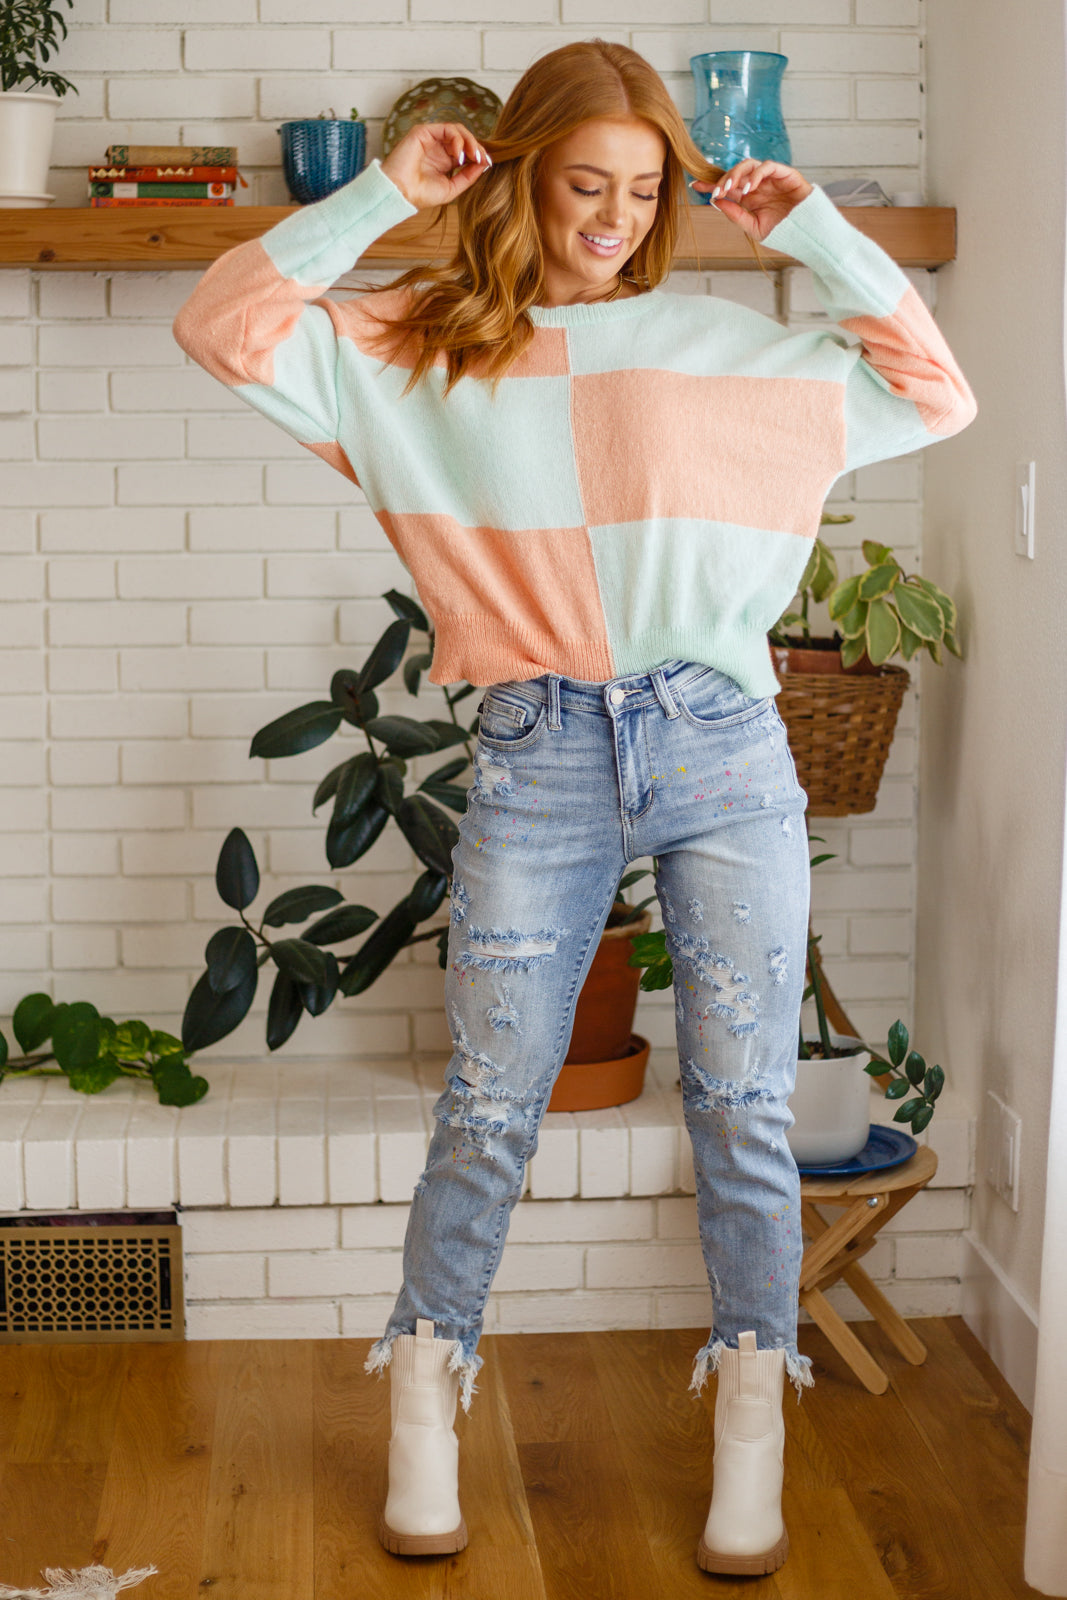 Make Your Move Checkered Knit Sweater in Mint   